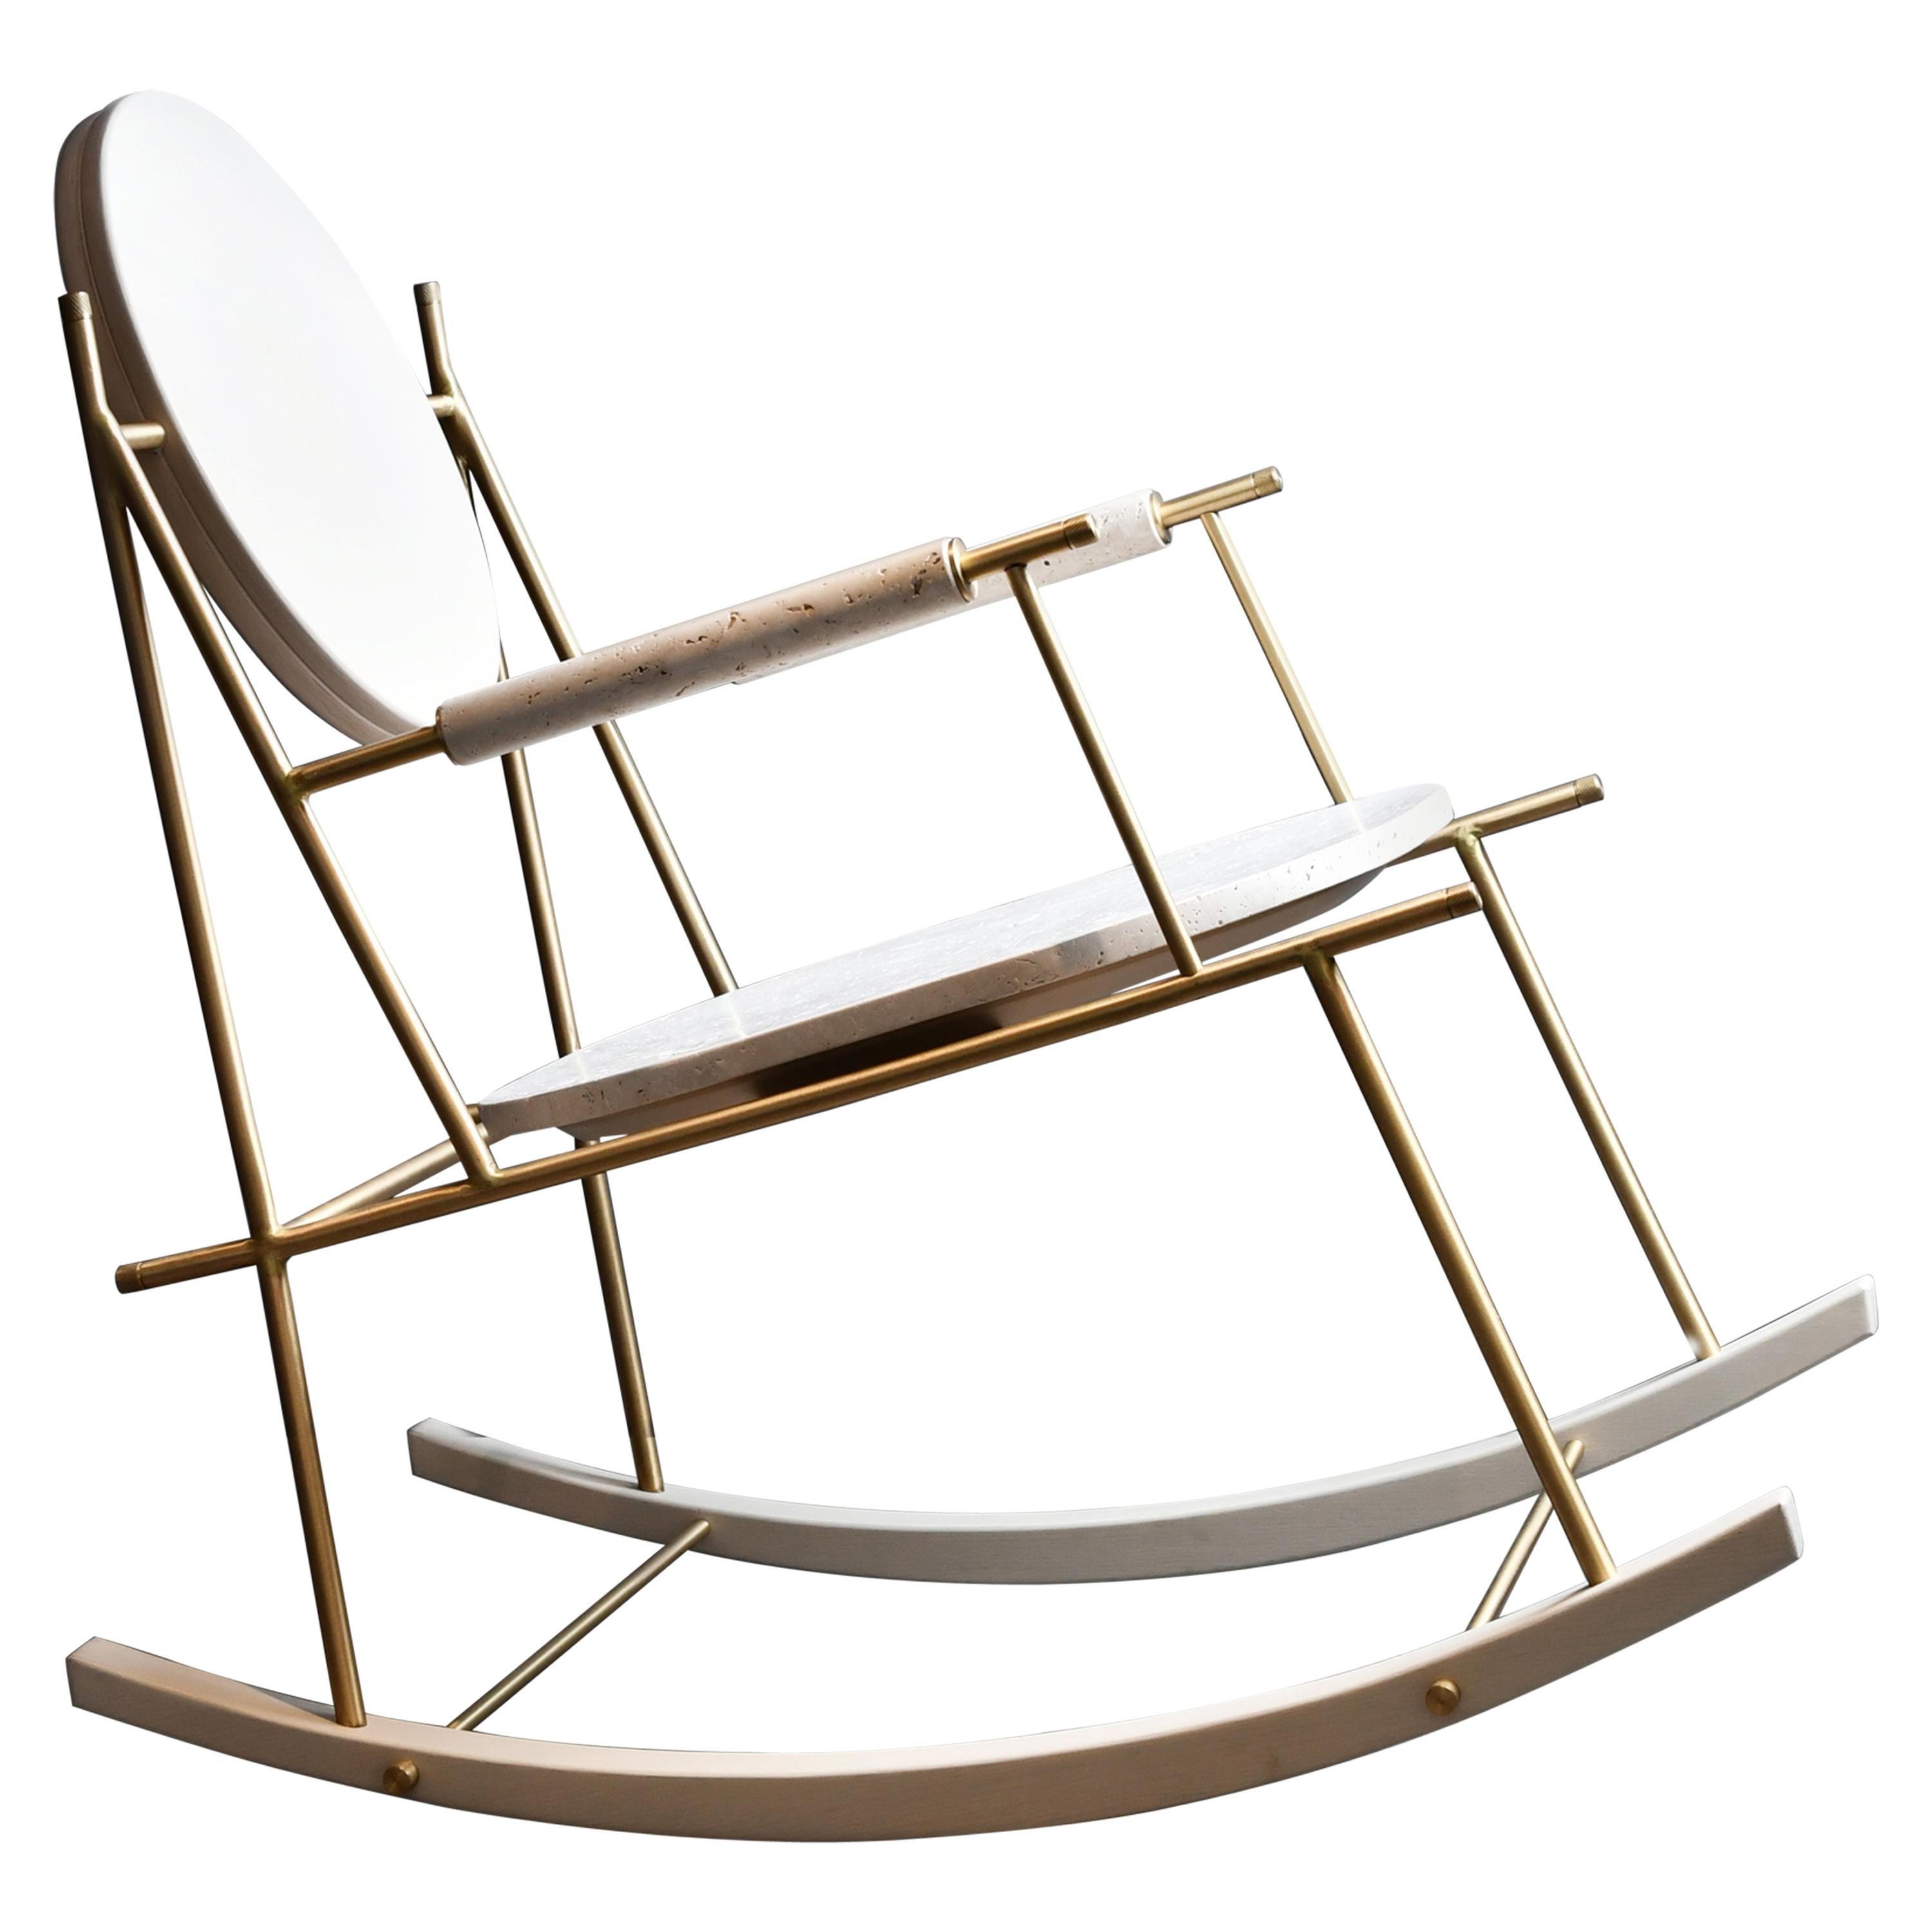 Brass and Travertino Nostalgia Rocking Chair by Saccal Design House